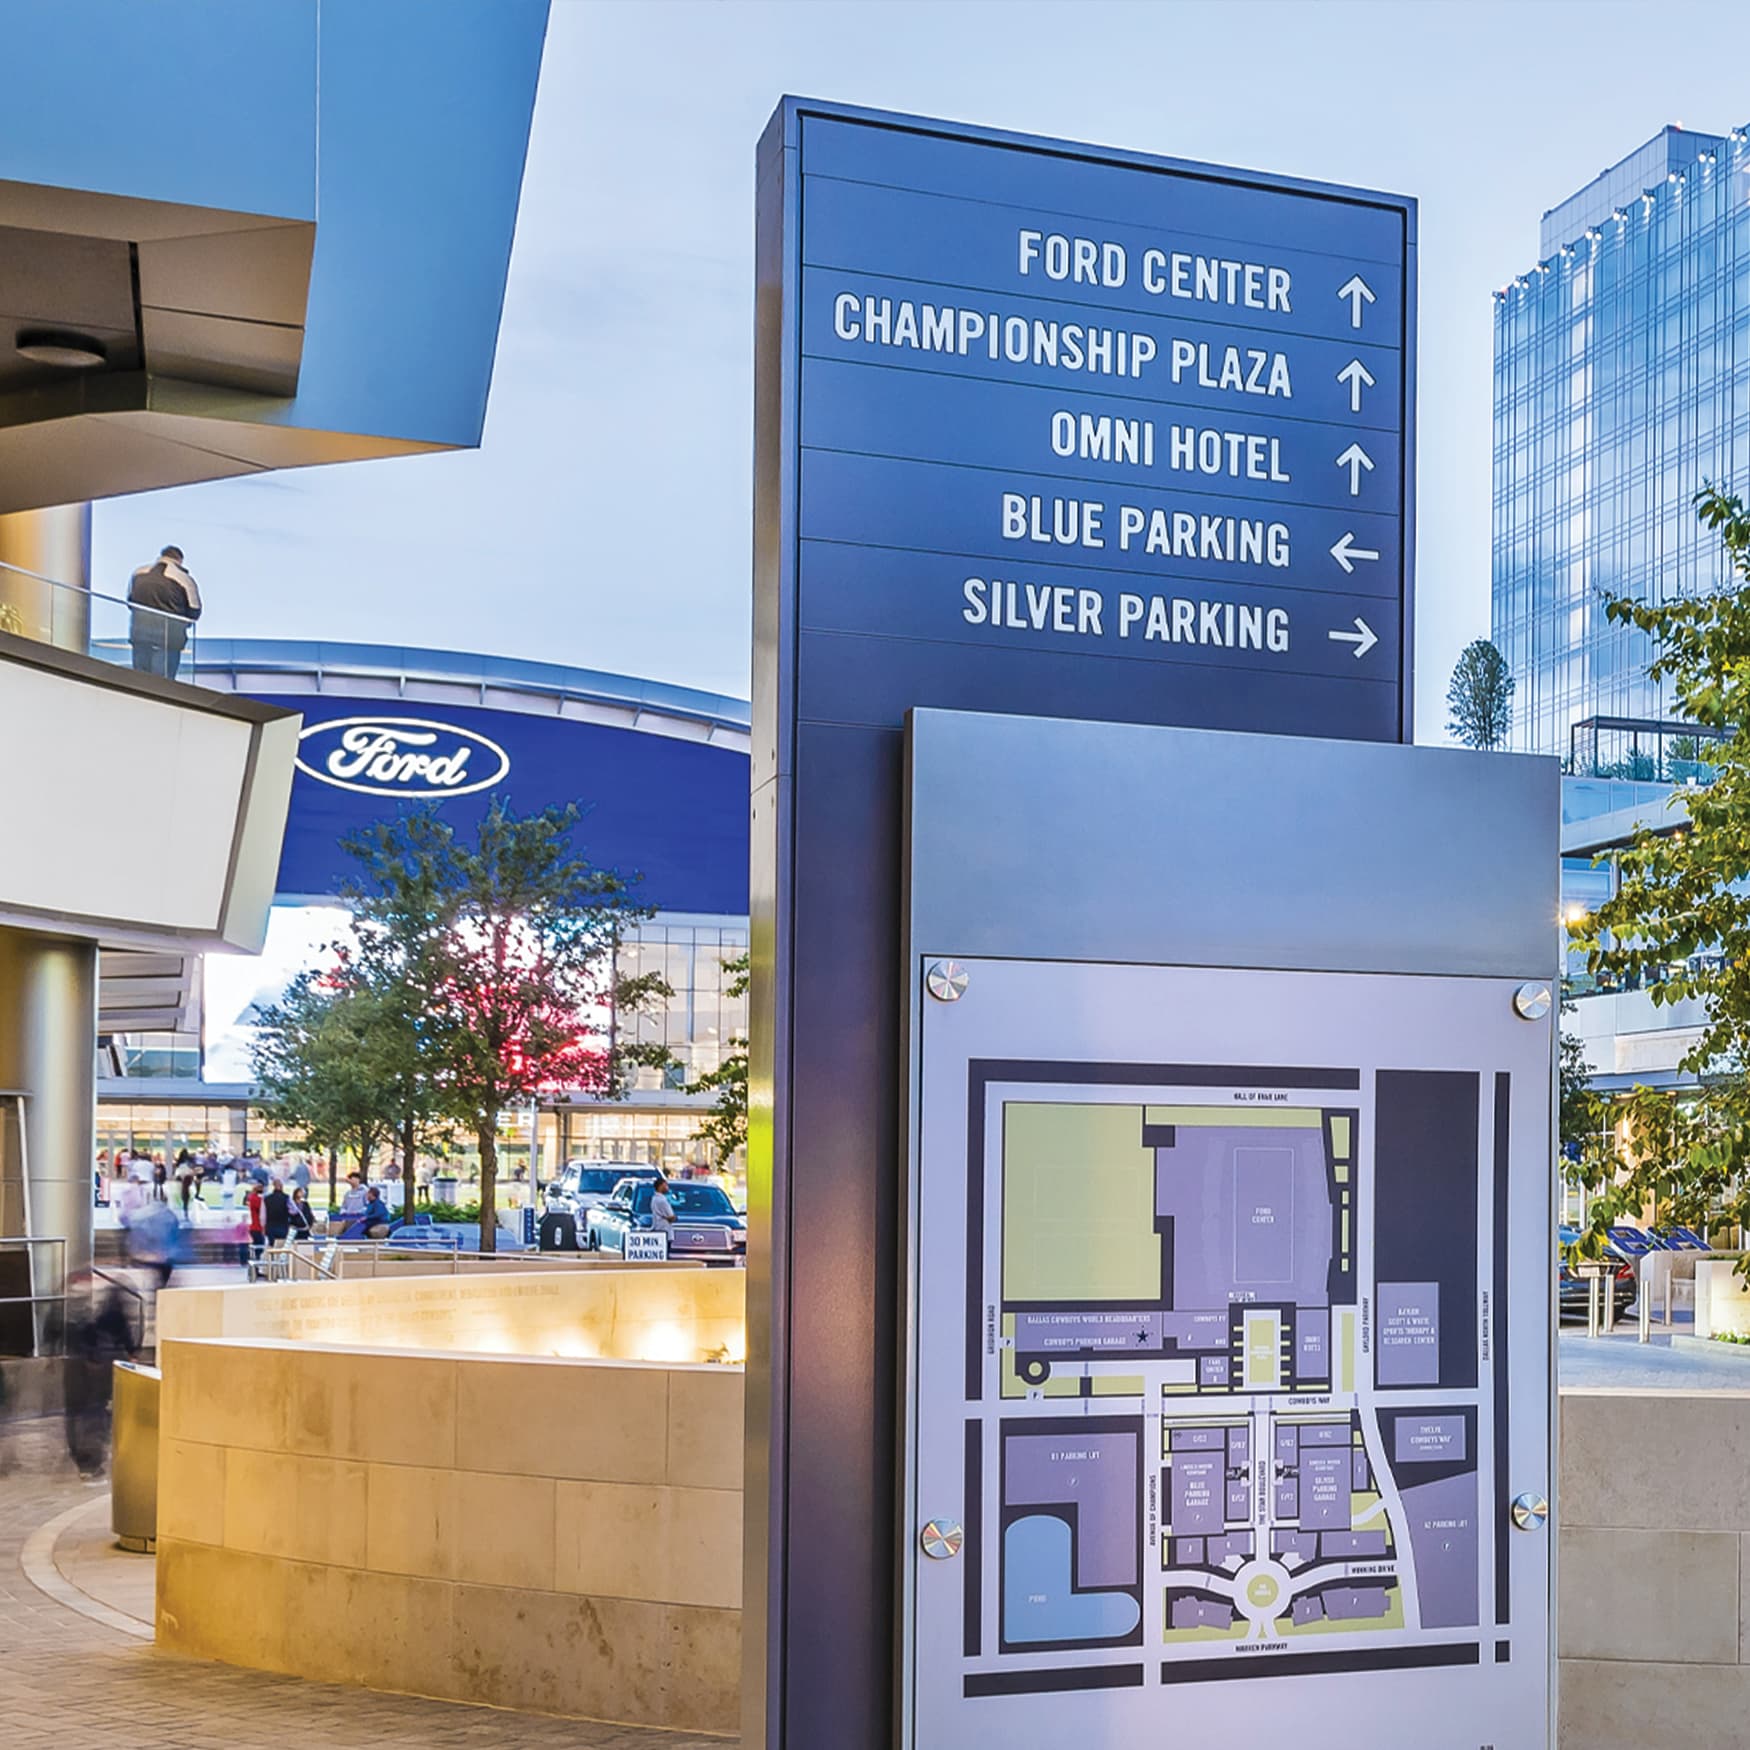 Dallas Cowboys headquarters wayfinding signage and directory map